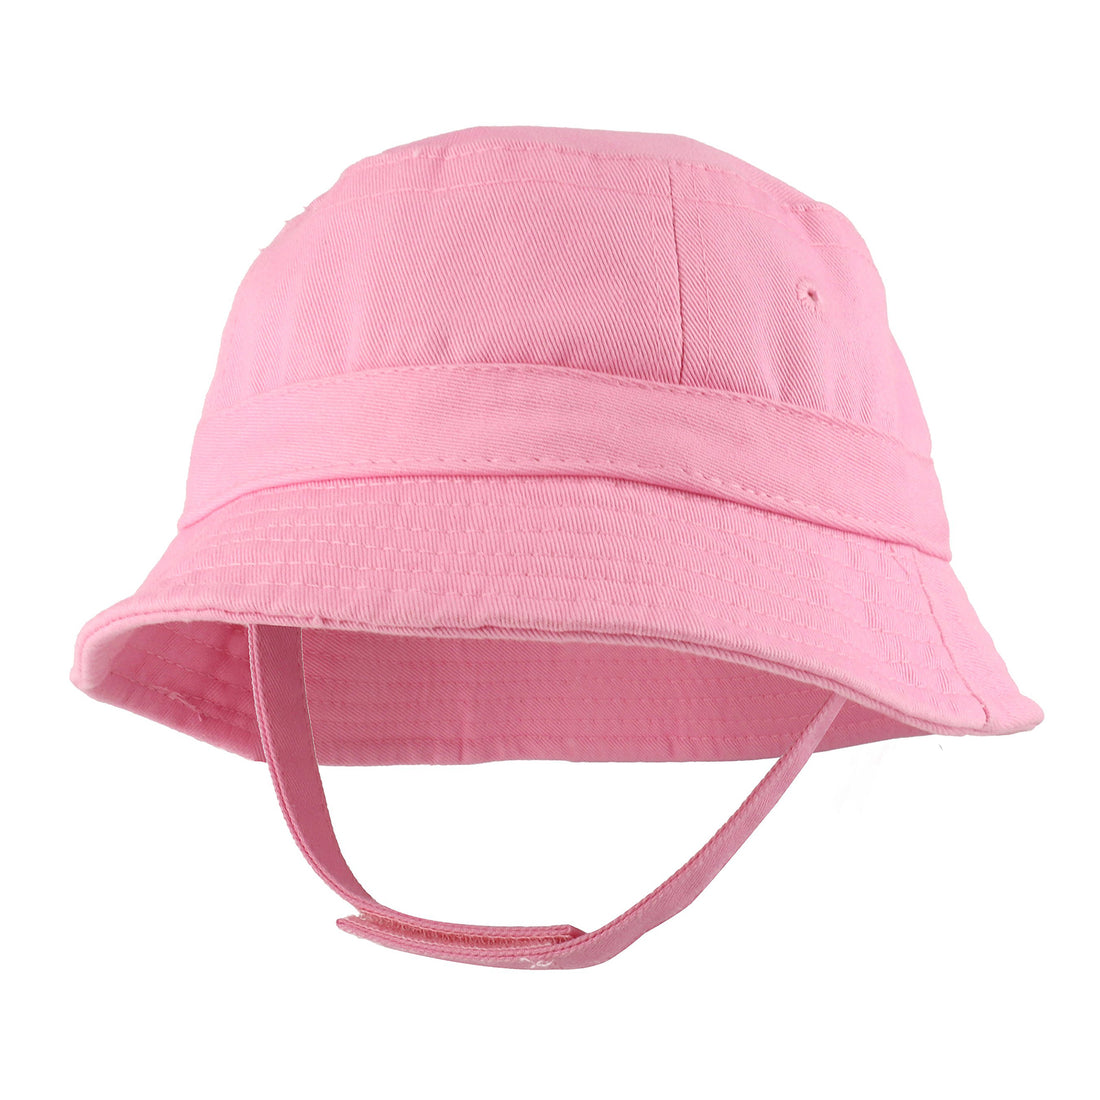 Trendy Apparel Shop Infant Baby's 100% Cotton Bucket Hat with Adjustable Chin Strap